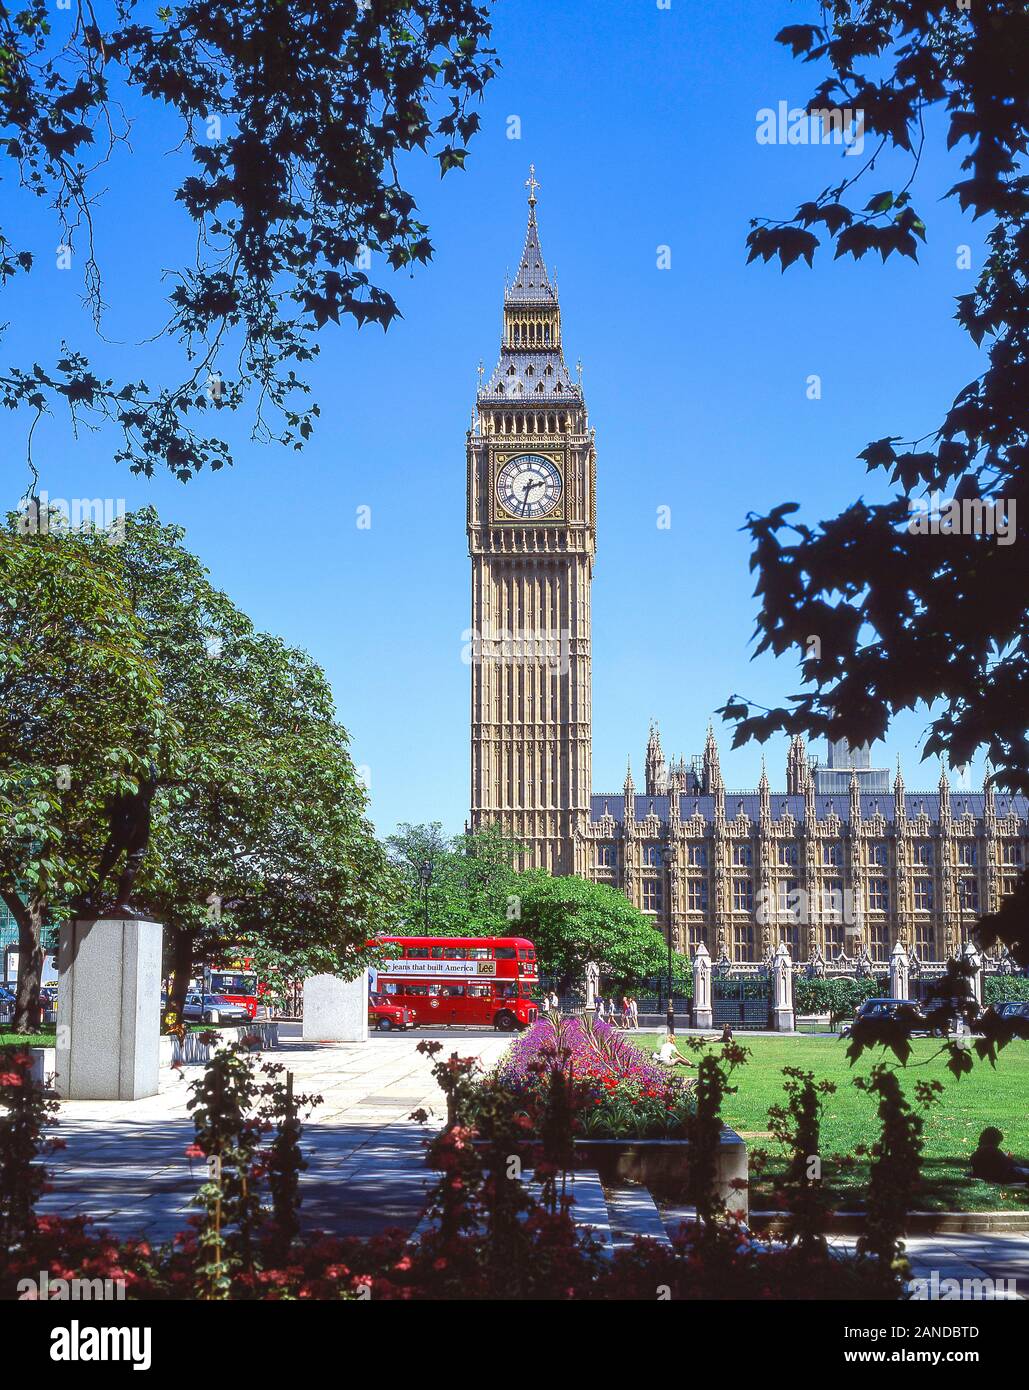 Big Ben (Elizabeth Tower) from Parliament Square, City of Westminster, Greater London, England, United Kingdom Stock Photo